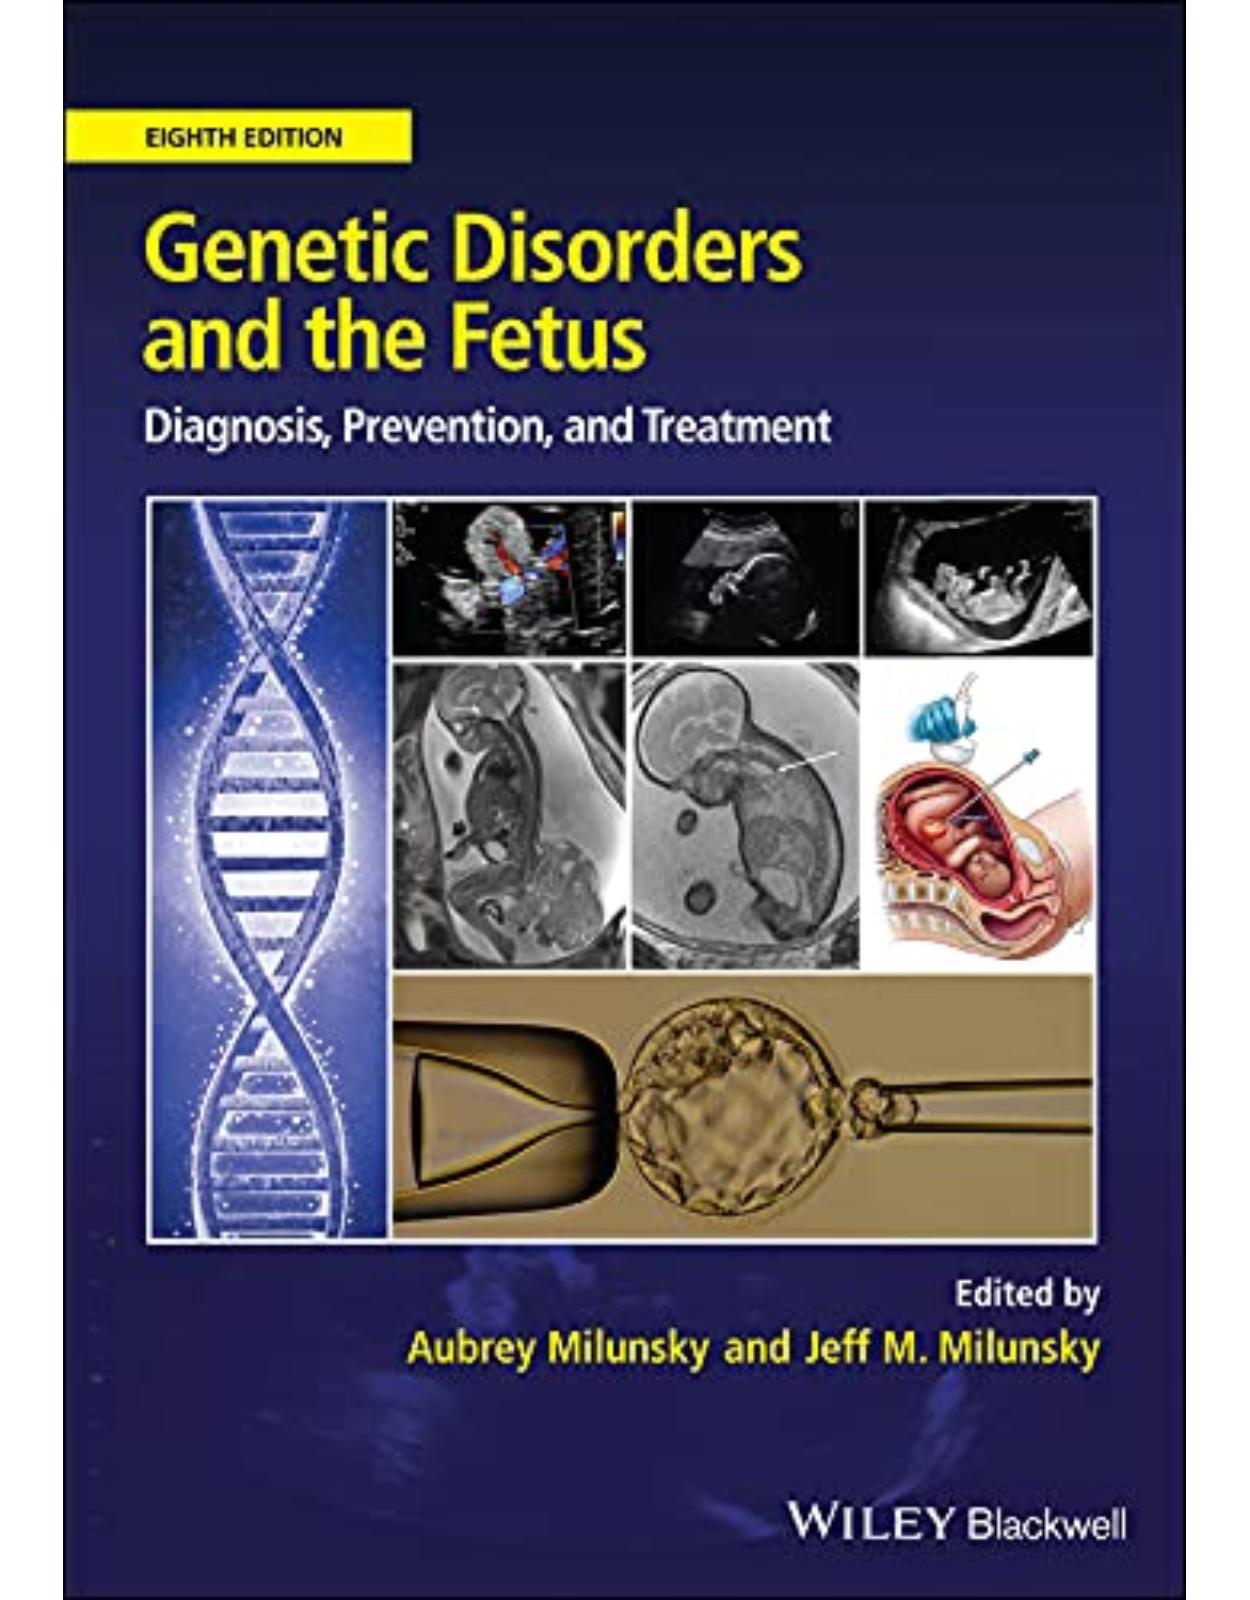 Genetic Disorders and the Fetus: Diagnosis, Prevention and Treatment 